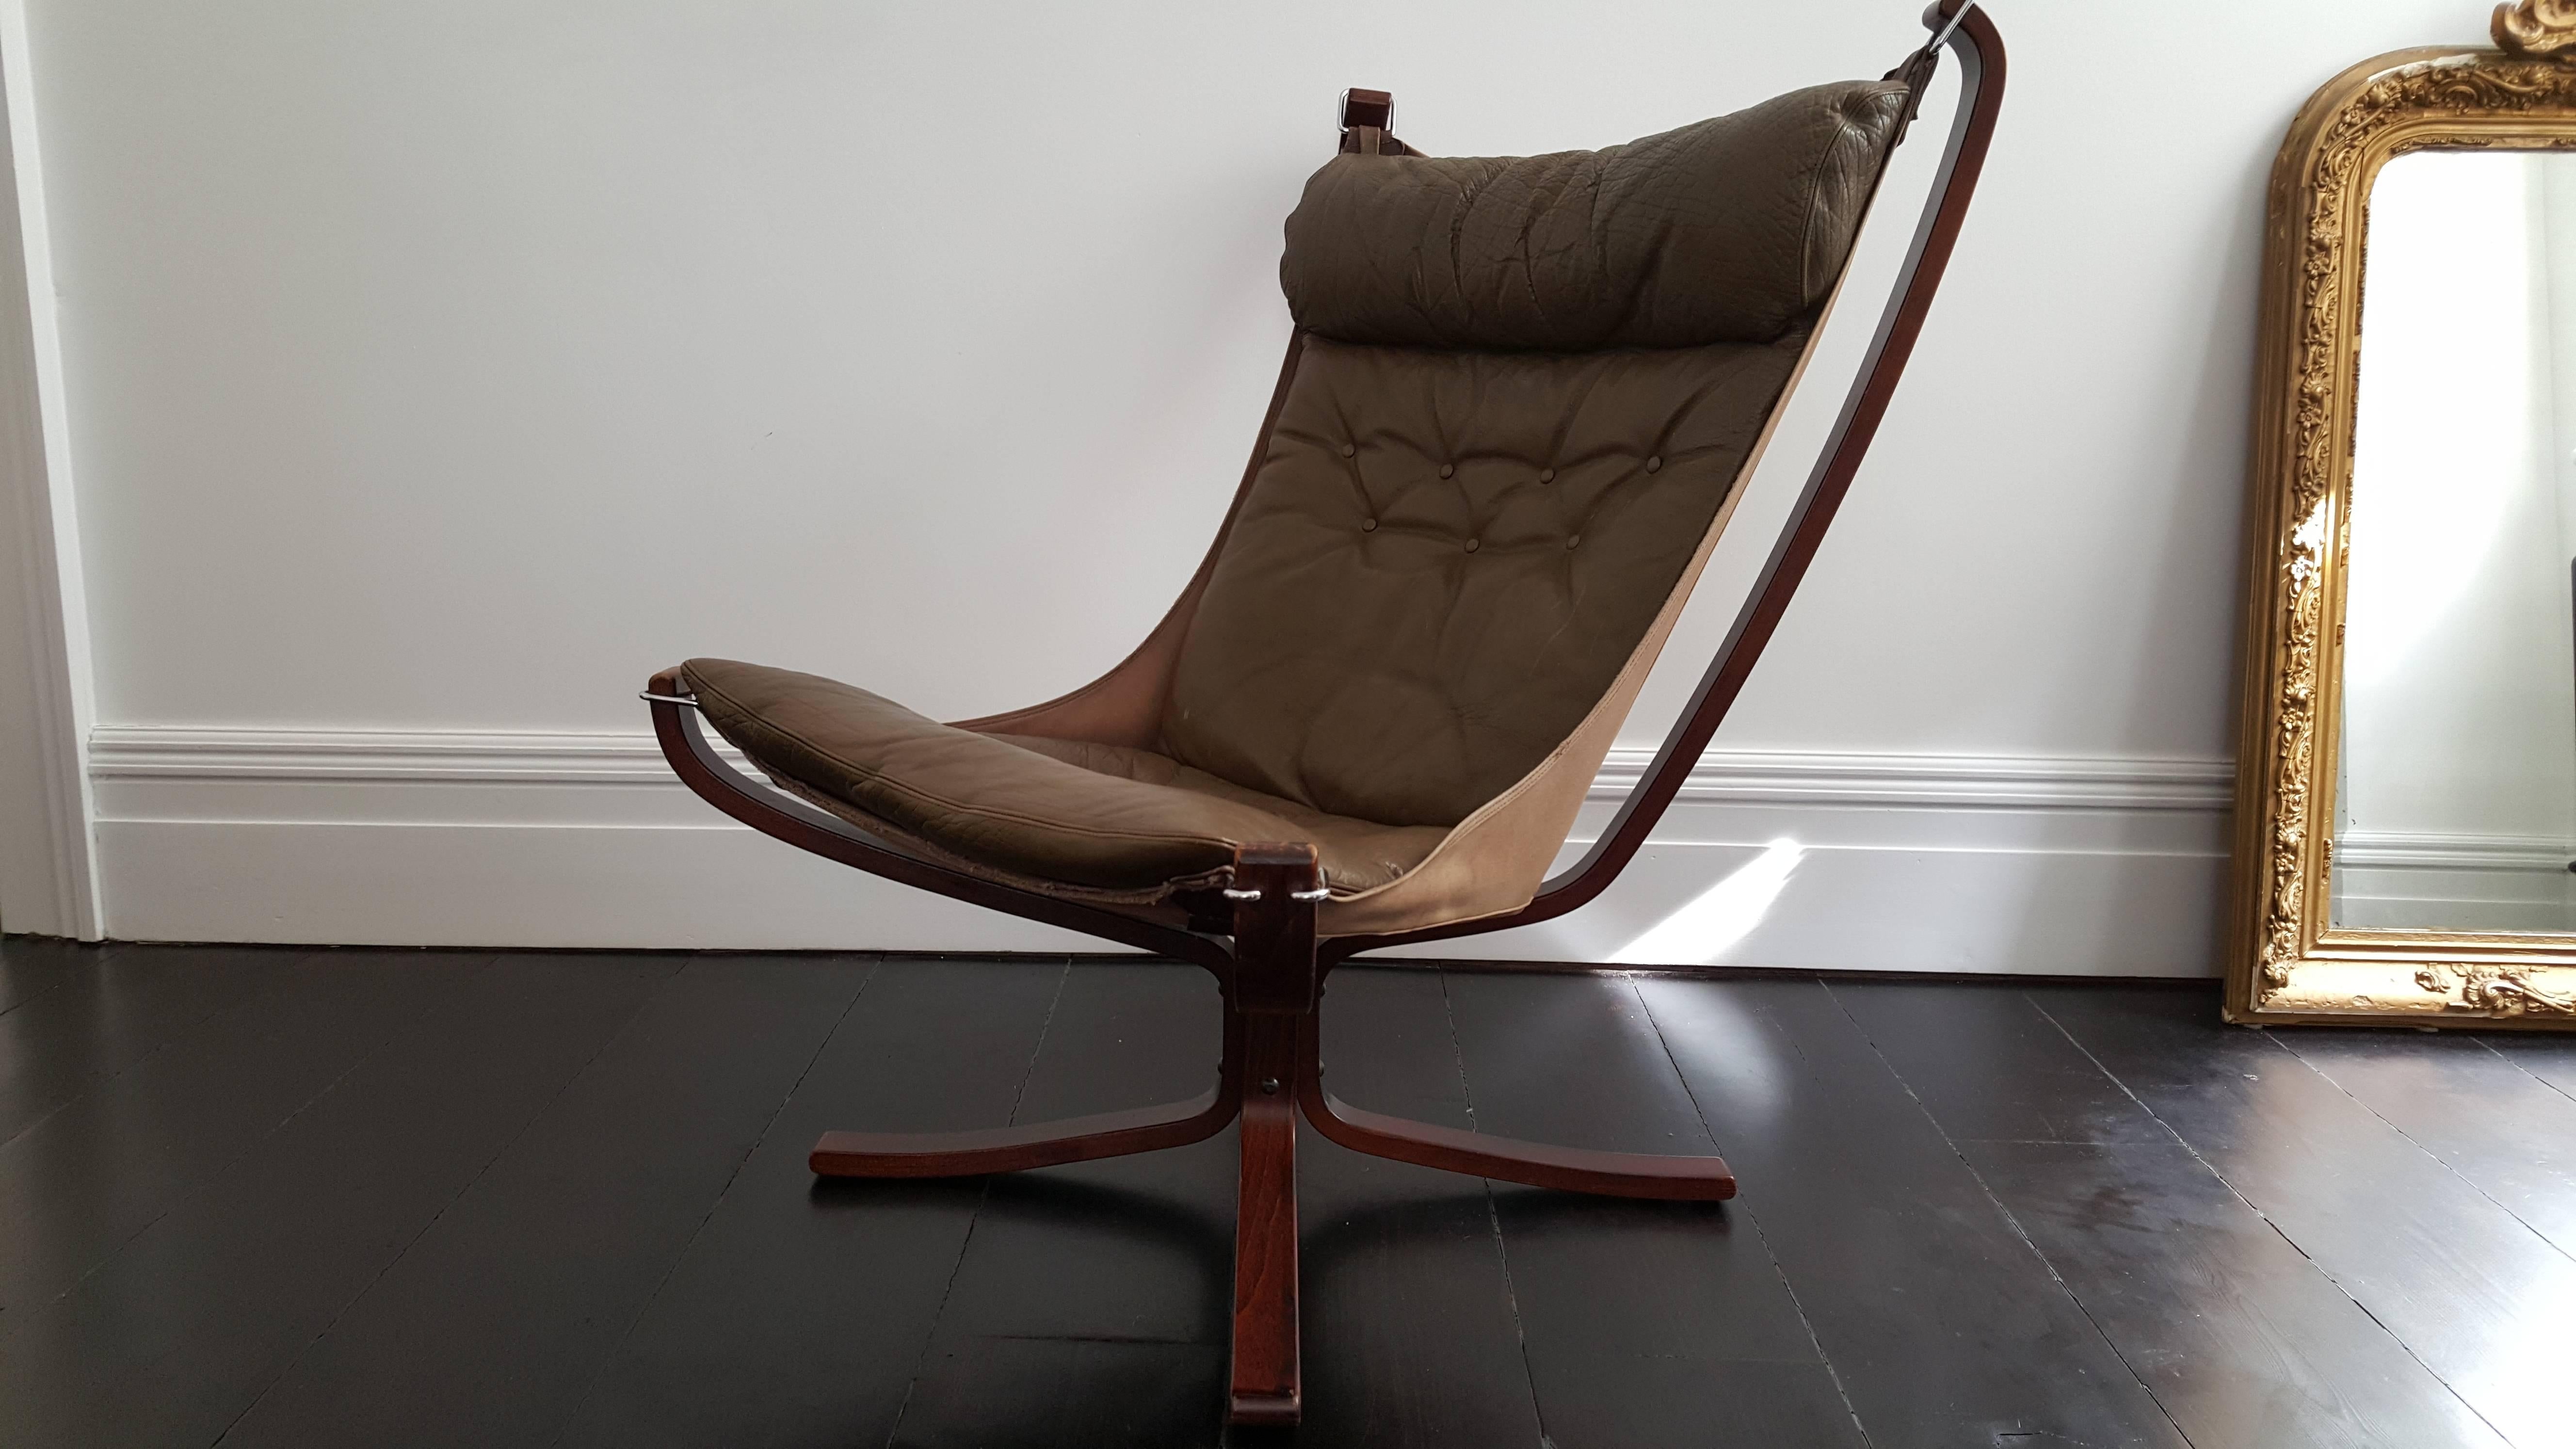 Vintage 1970s Sigurd Ressell designed High-backed X-framed Falcon chair with green coloured leather.

A super comfortable, amazing looking 1970s designed Sigurd Resell iconic Falcon chair. X-framed with hammock design with green leather produced